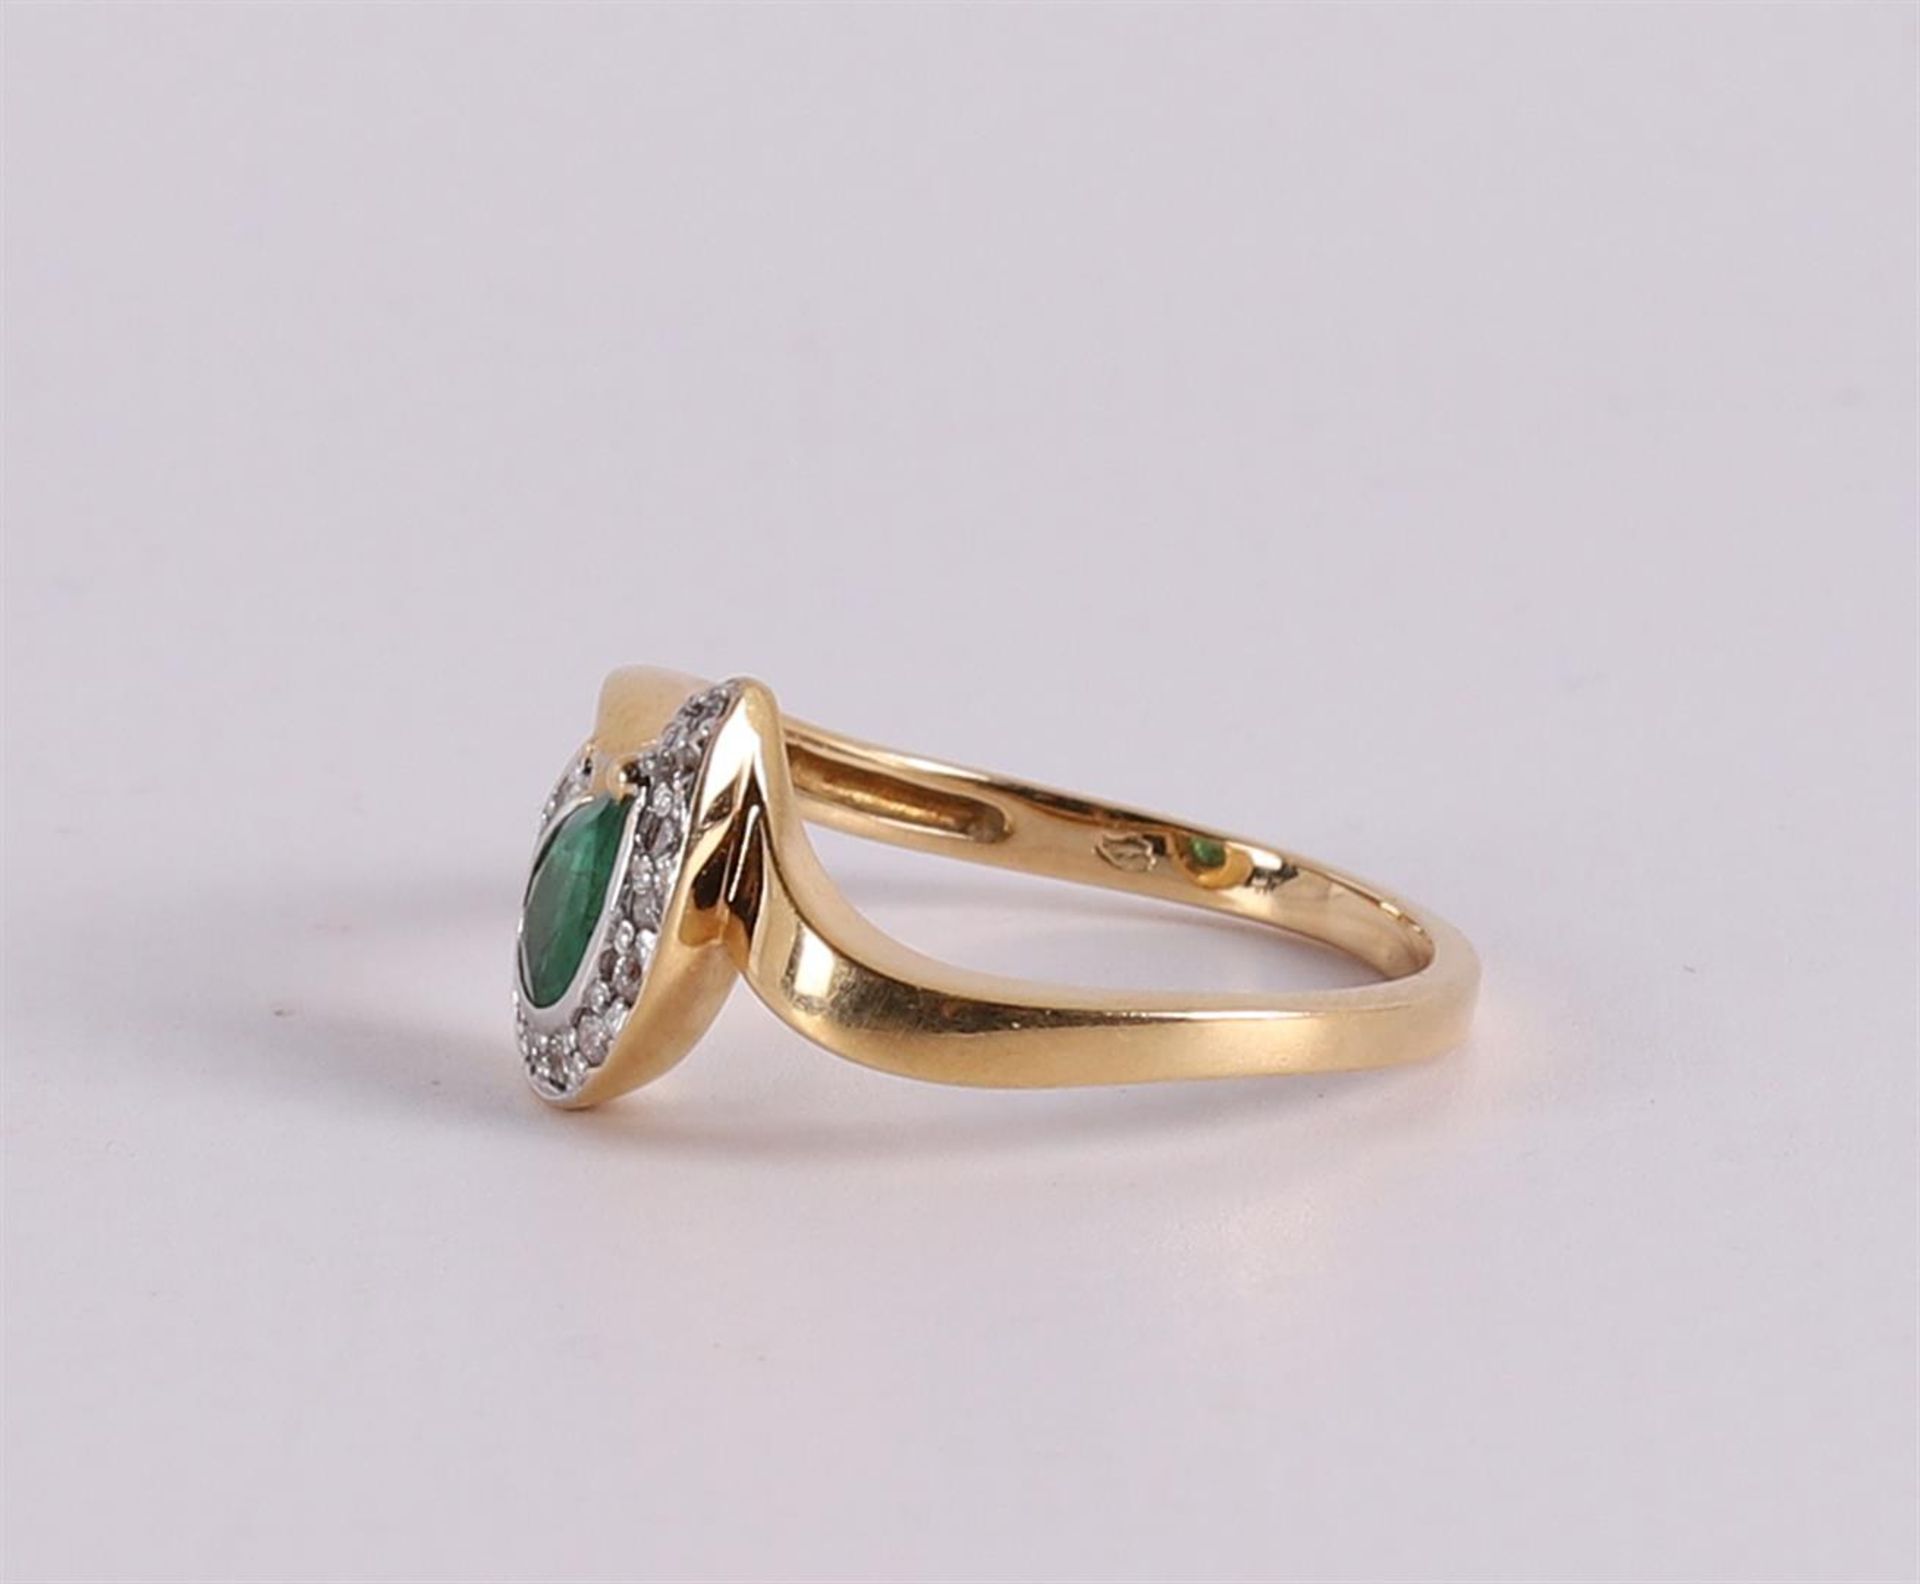 An 18 carat gold ring with an emerald flanked by 12 diamonds - Image 2 of 2